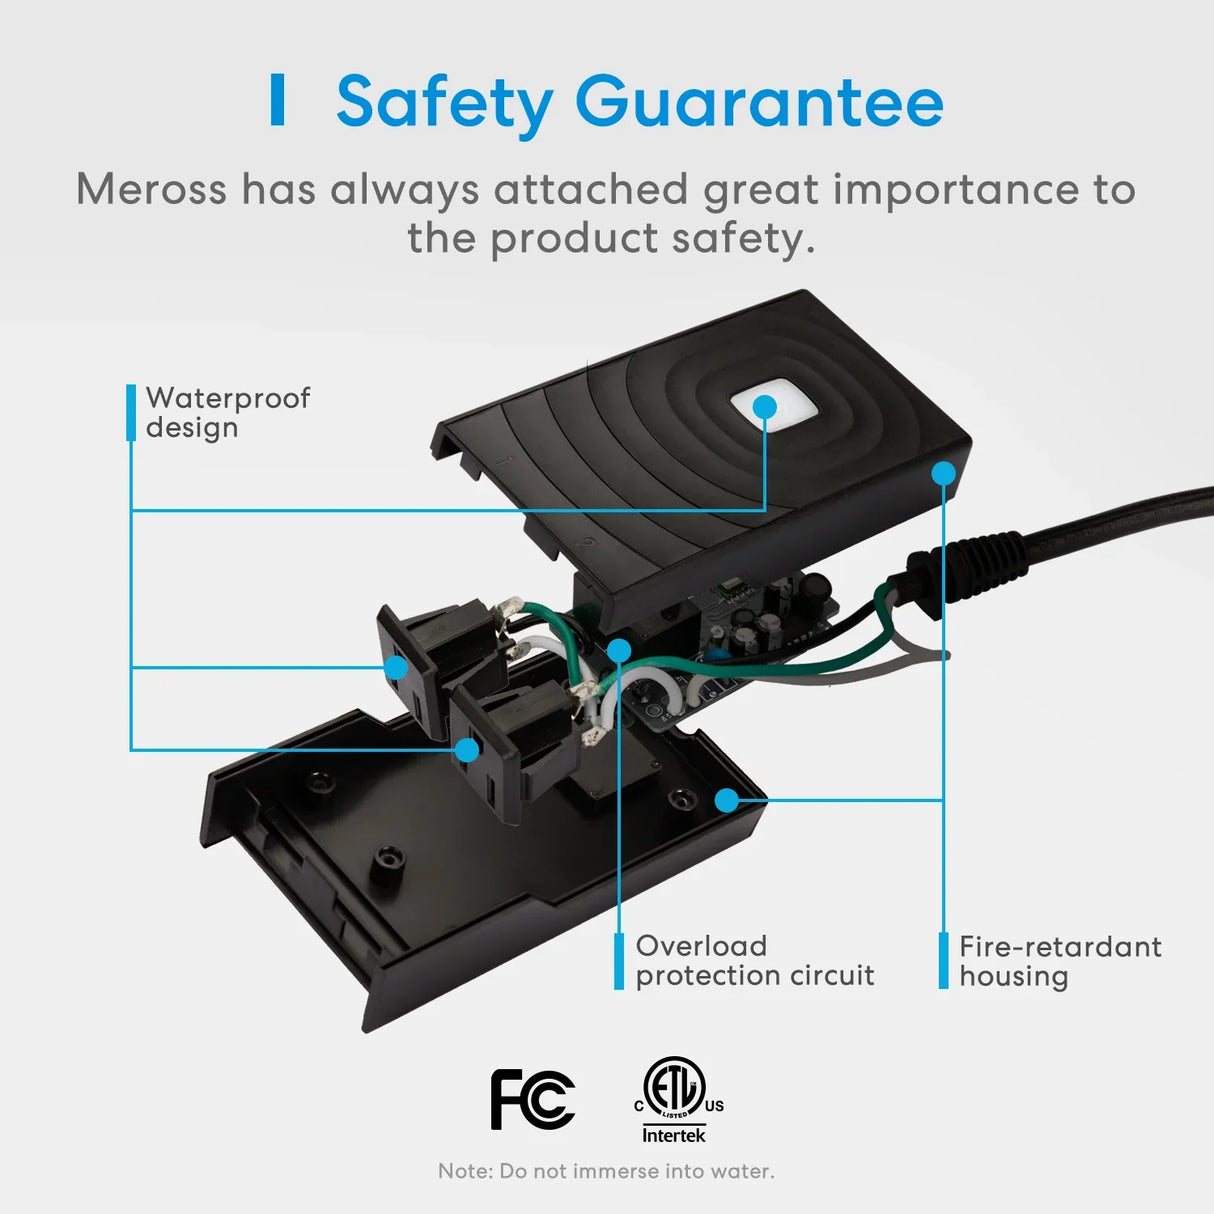 the safety guarantee system is designed to protect against and prevent the use of the device